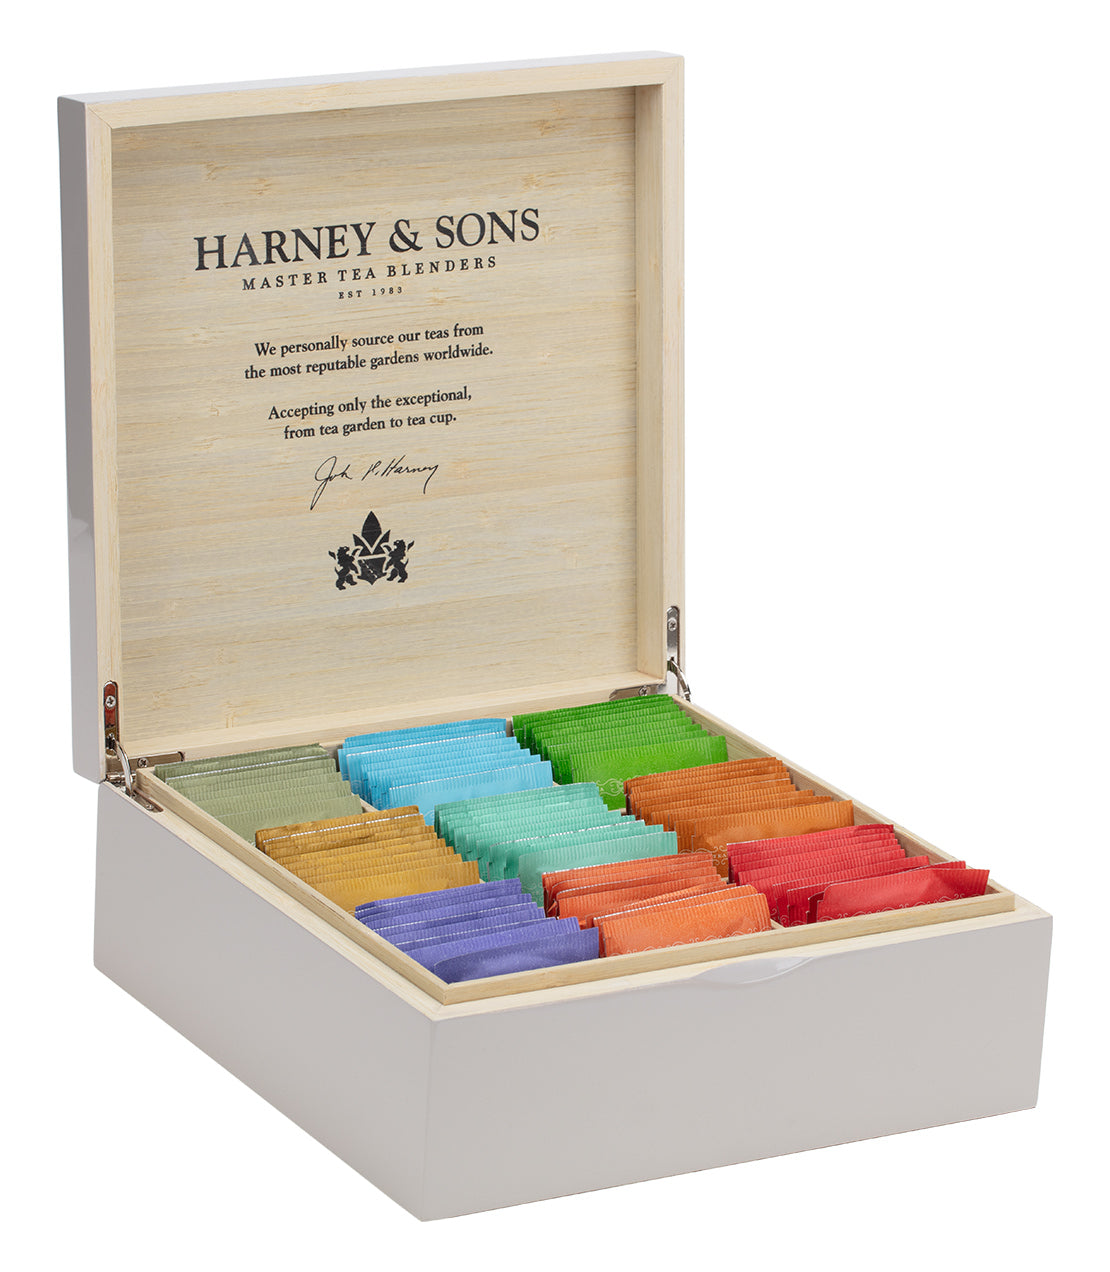 Taupe Wooden Heirloom Tea Chest Featuring Nine Teas - Teabags - Teabags Taupe Wooden Heirloom Tea Chest Featuring Nine Teas - Harney & Sons Fine Teas